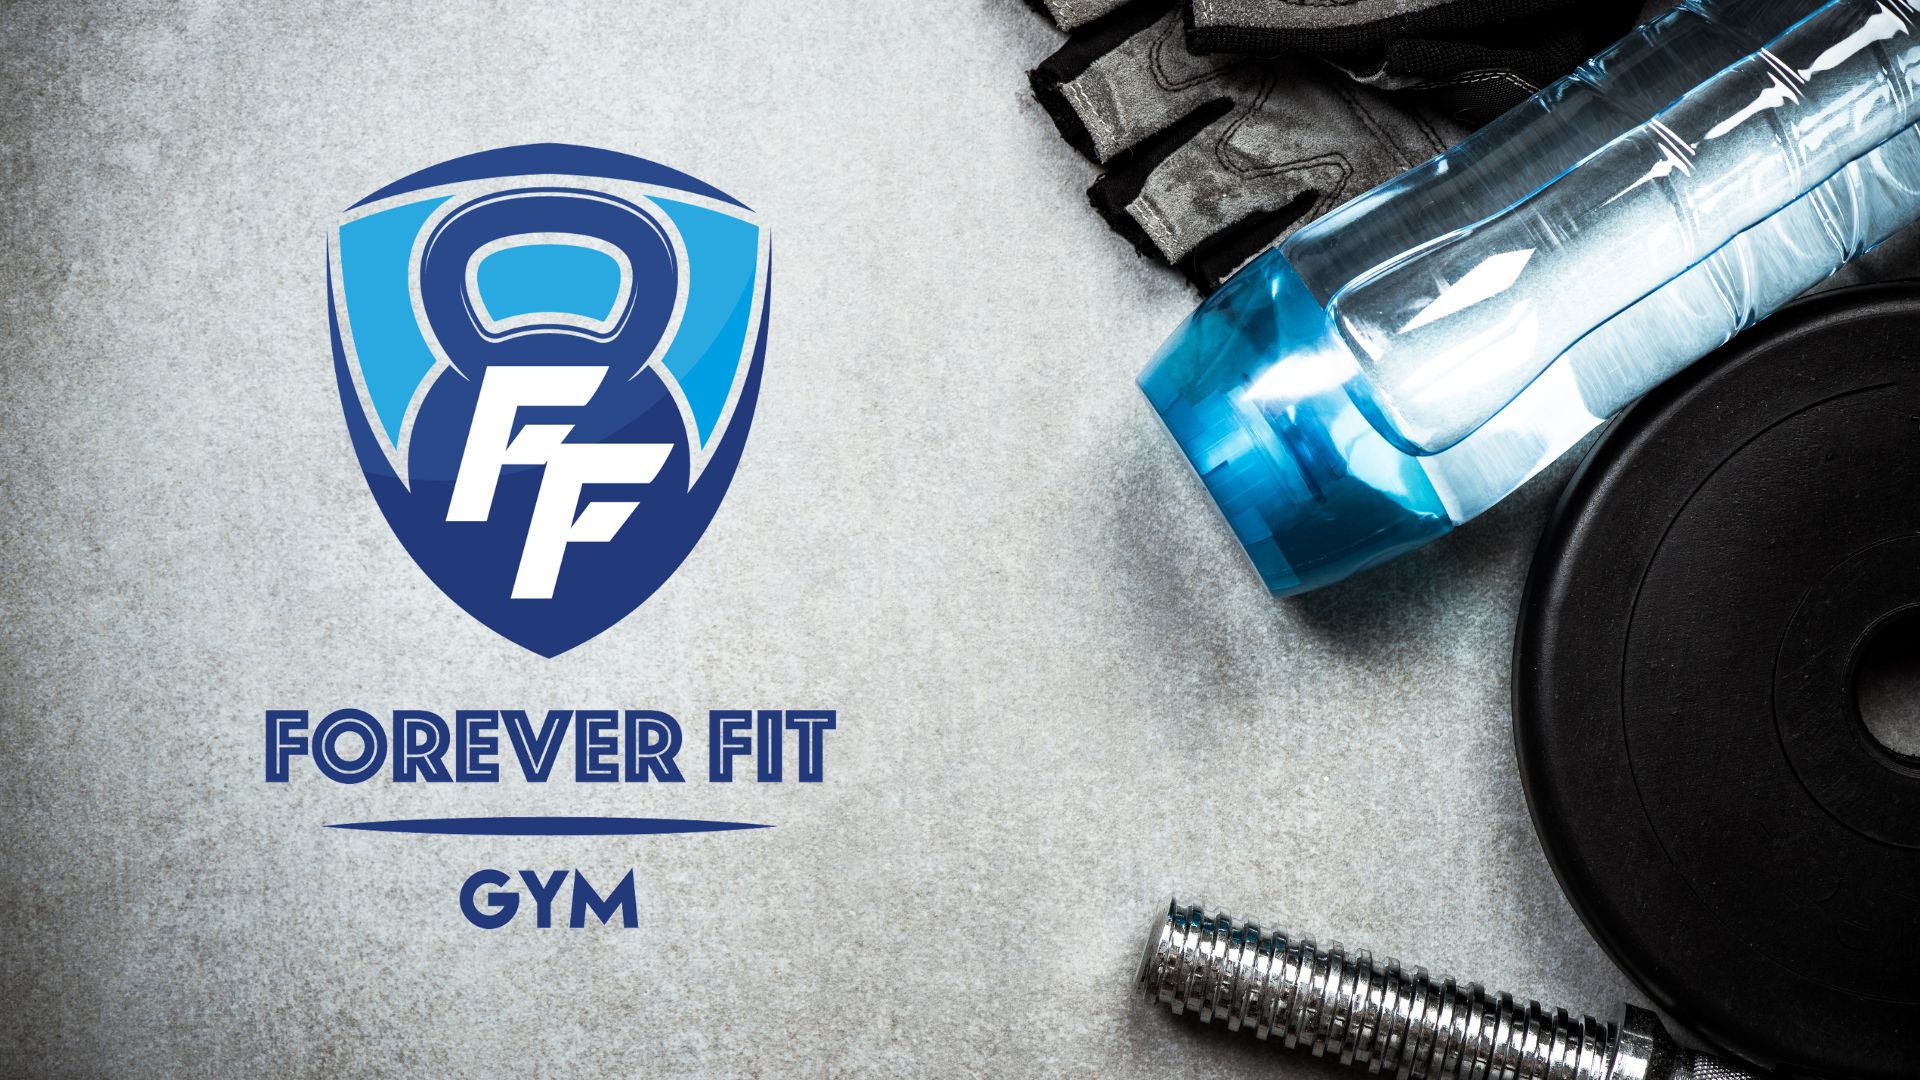 Forever Fit Gym - Forever Fit Gym updated their cover photo.